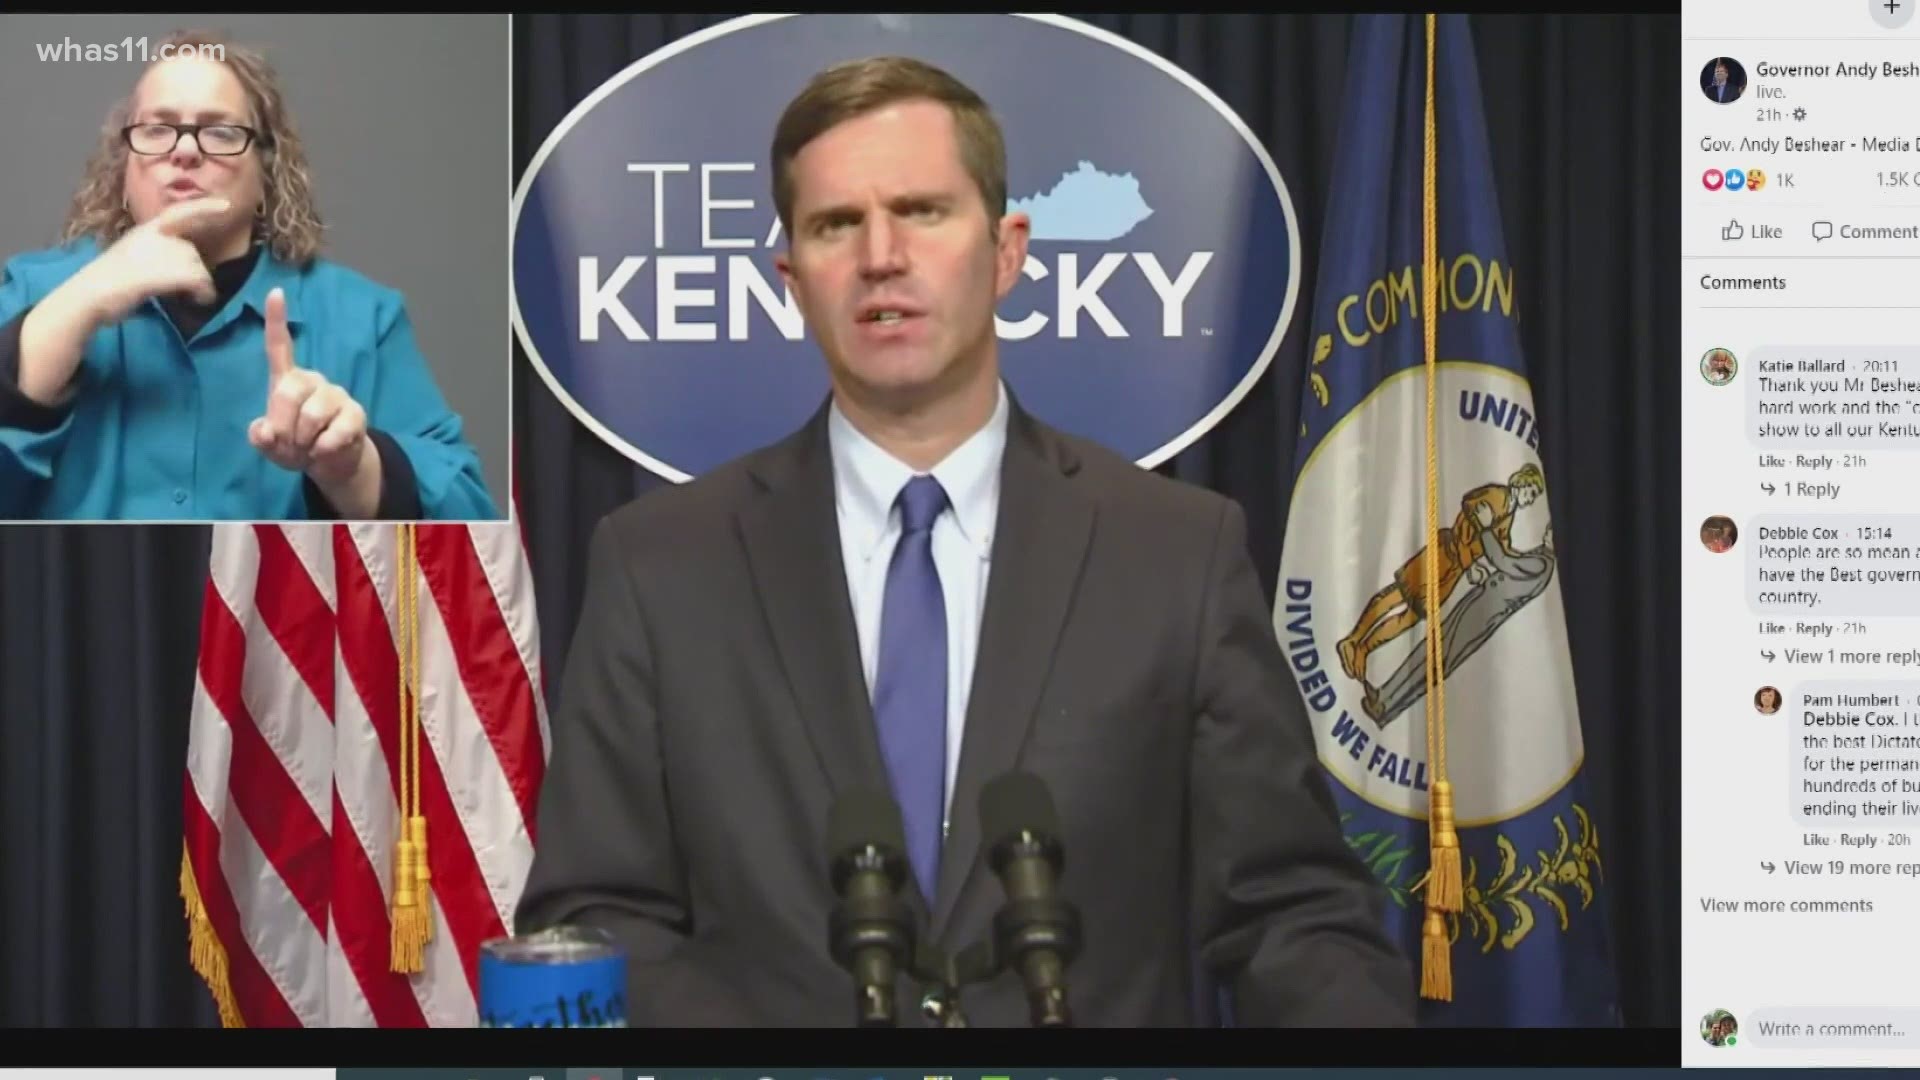 As lawmakers in D.C. debate the impeachment of our President, leaders in Frankfort are discussing the possibility of impeaching Kentucky's governor.